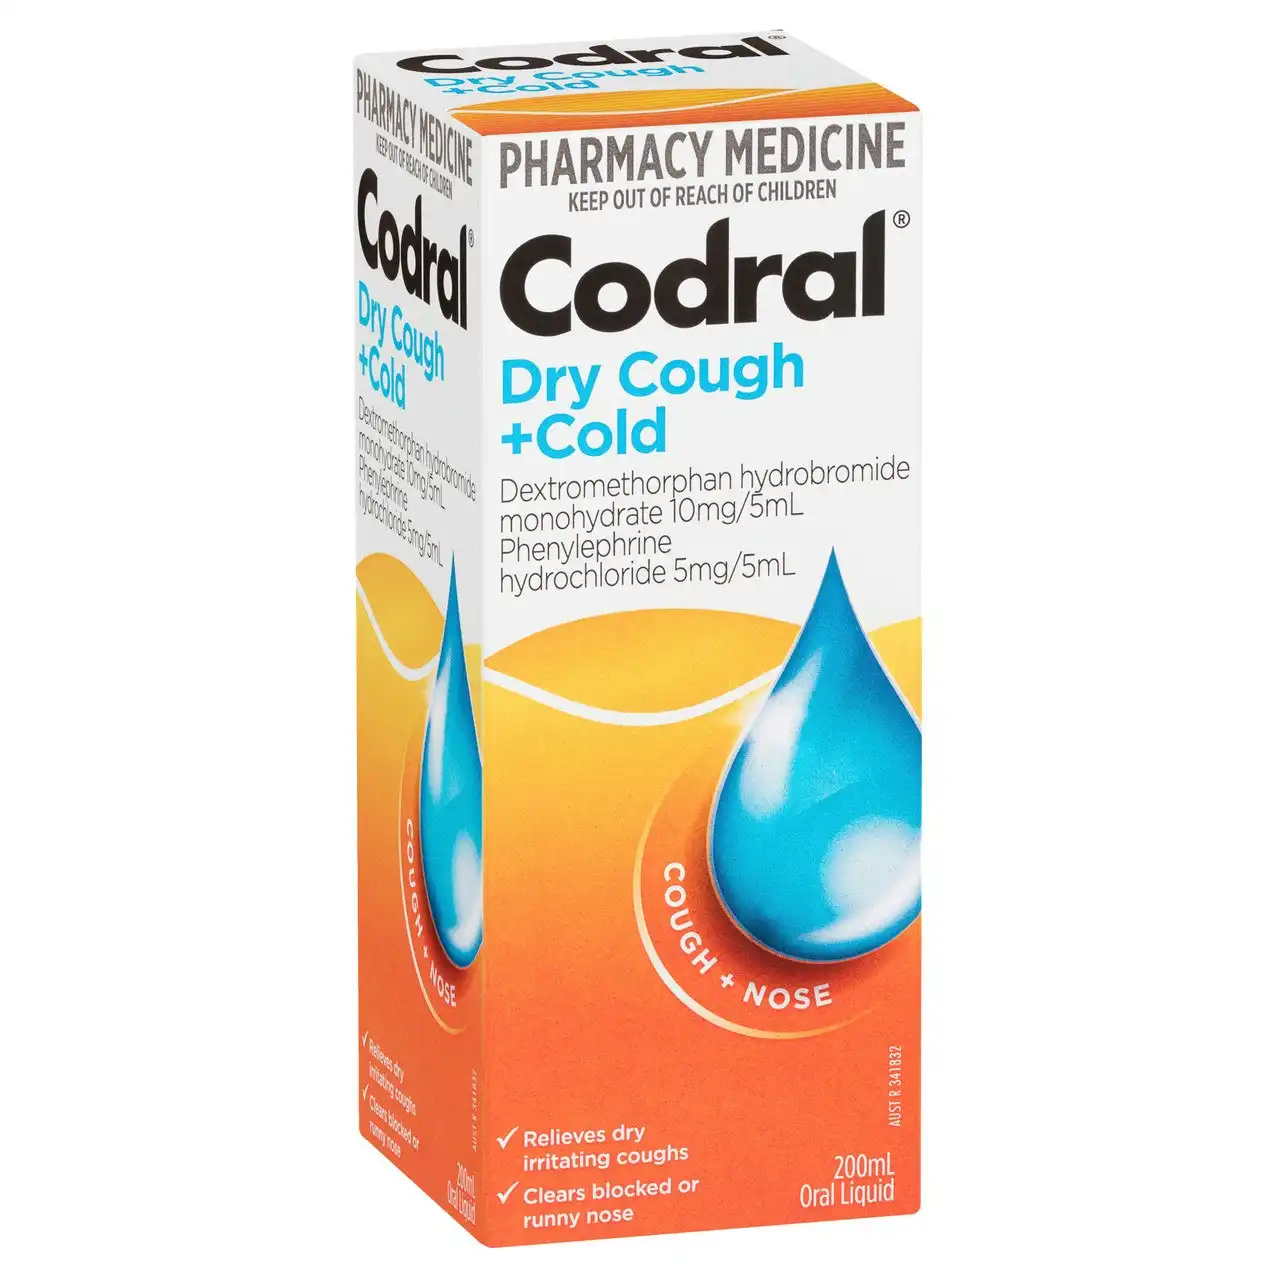 CODRAL Dry Cough + Cold Liquid Berry Flavour 200mL